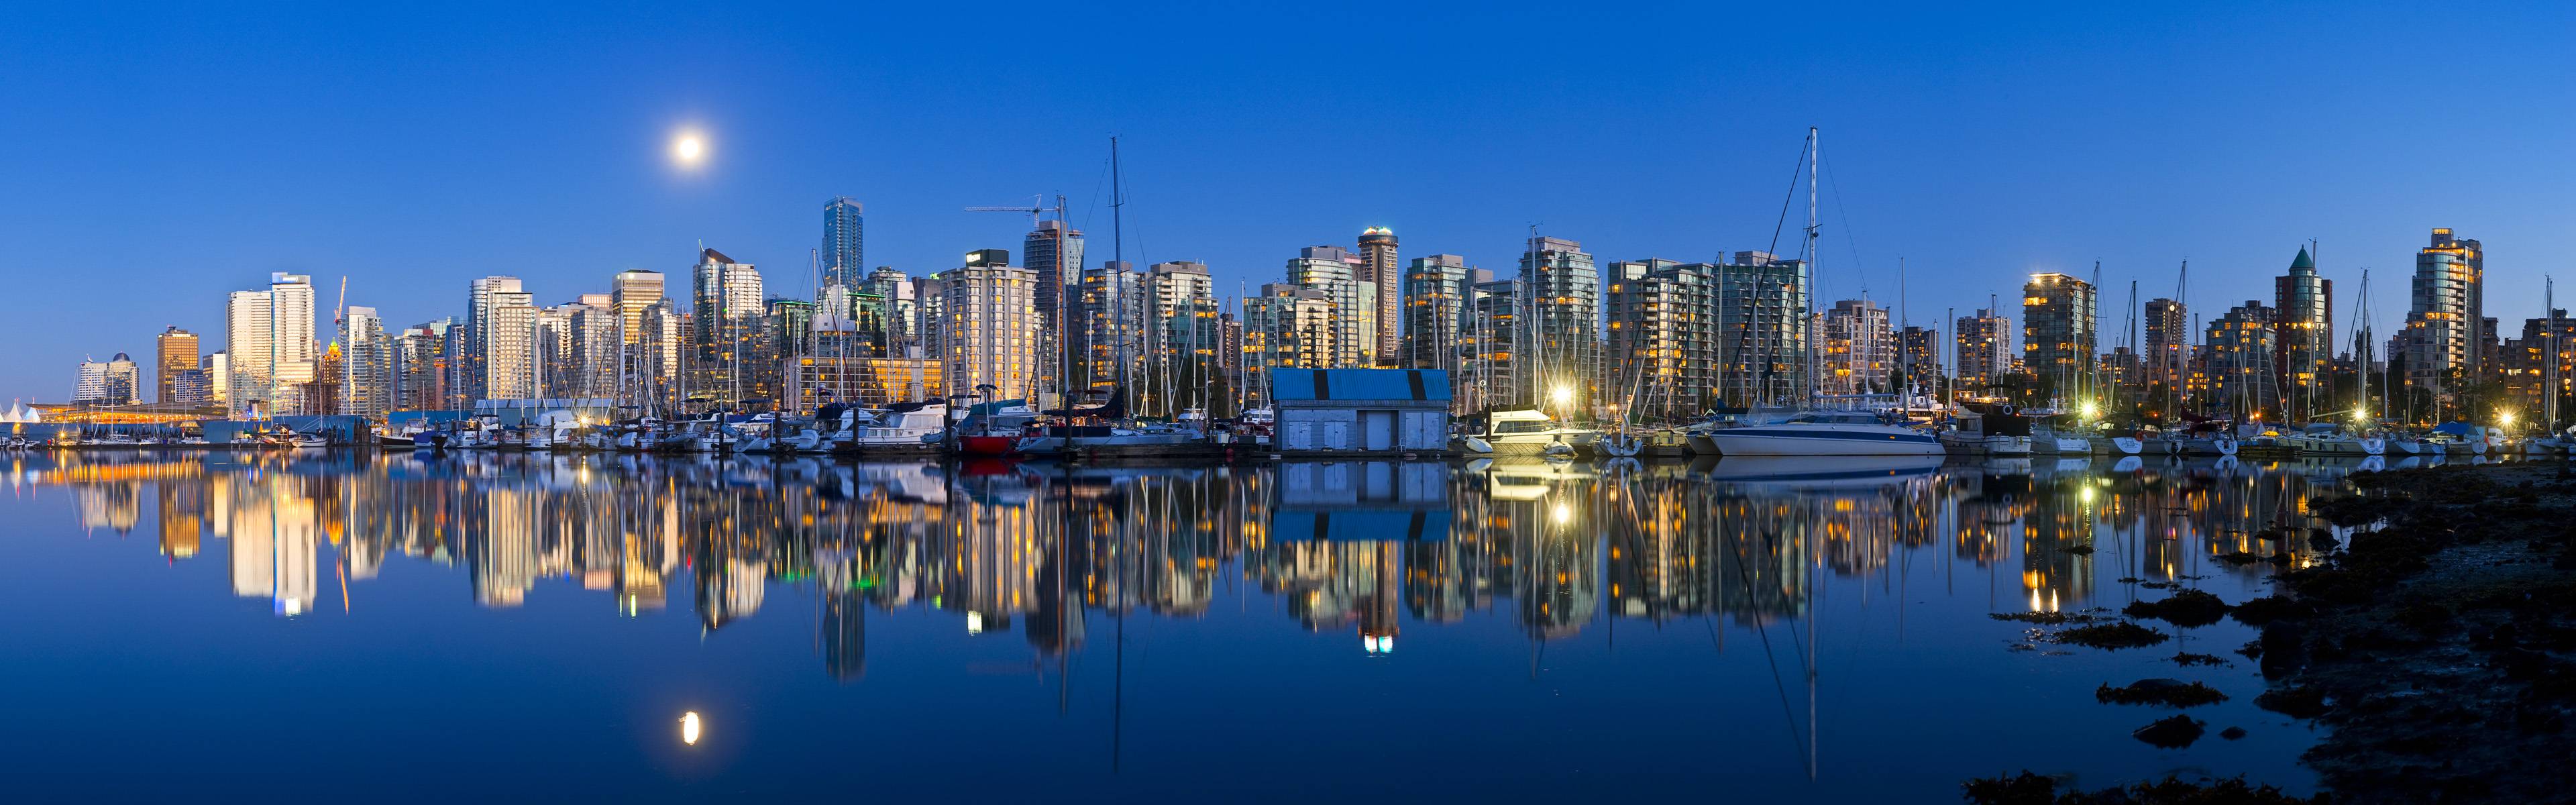 Cityscapes panoramic wallpaper theme for Windows 8   Windows 8 3840x1200